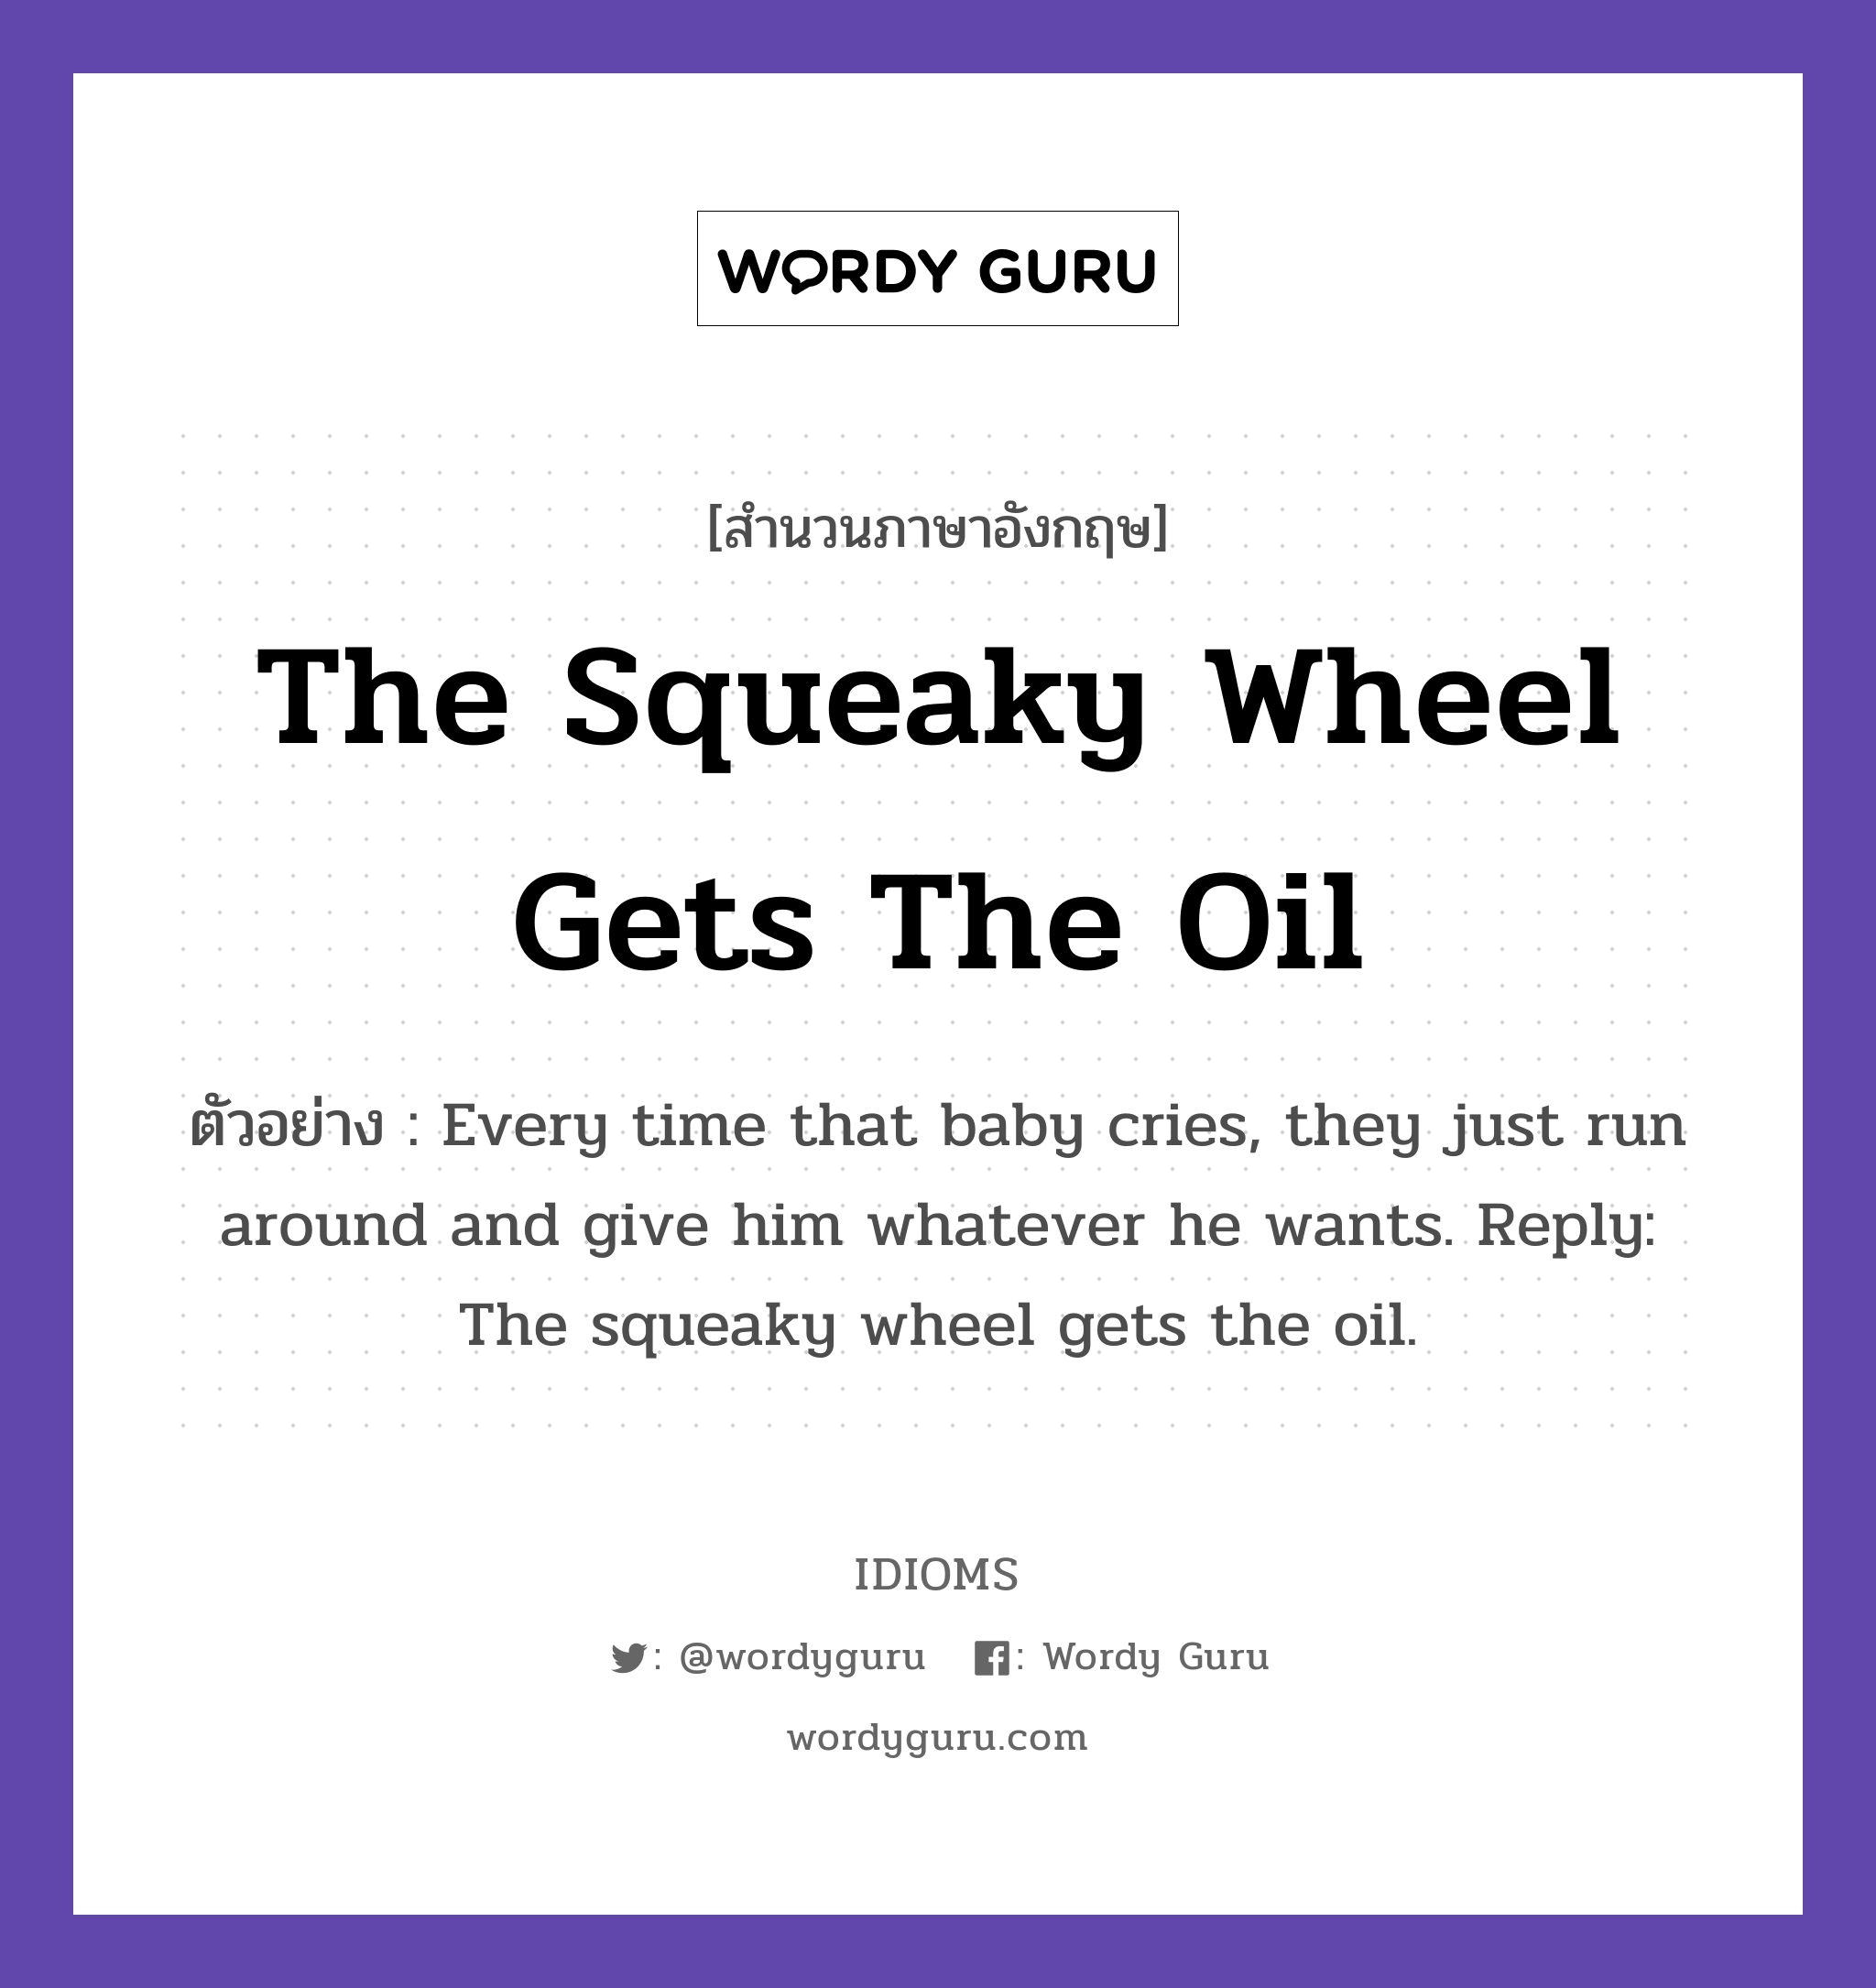 The Squeaky Wheel Gets The Oil แปลว่า?, สำนวนภาษาอังกฤษ The Squeaky Wheel Gets The Oil ตัวอย่าง Every time that baby cries, they just run around and give him whatever he wants. Reply: The squeaky wheel gets the oil.